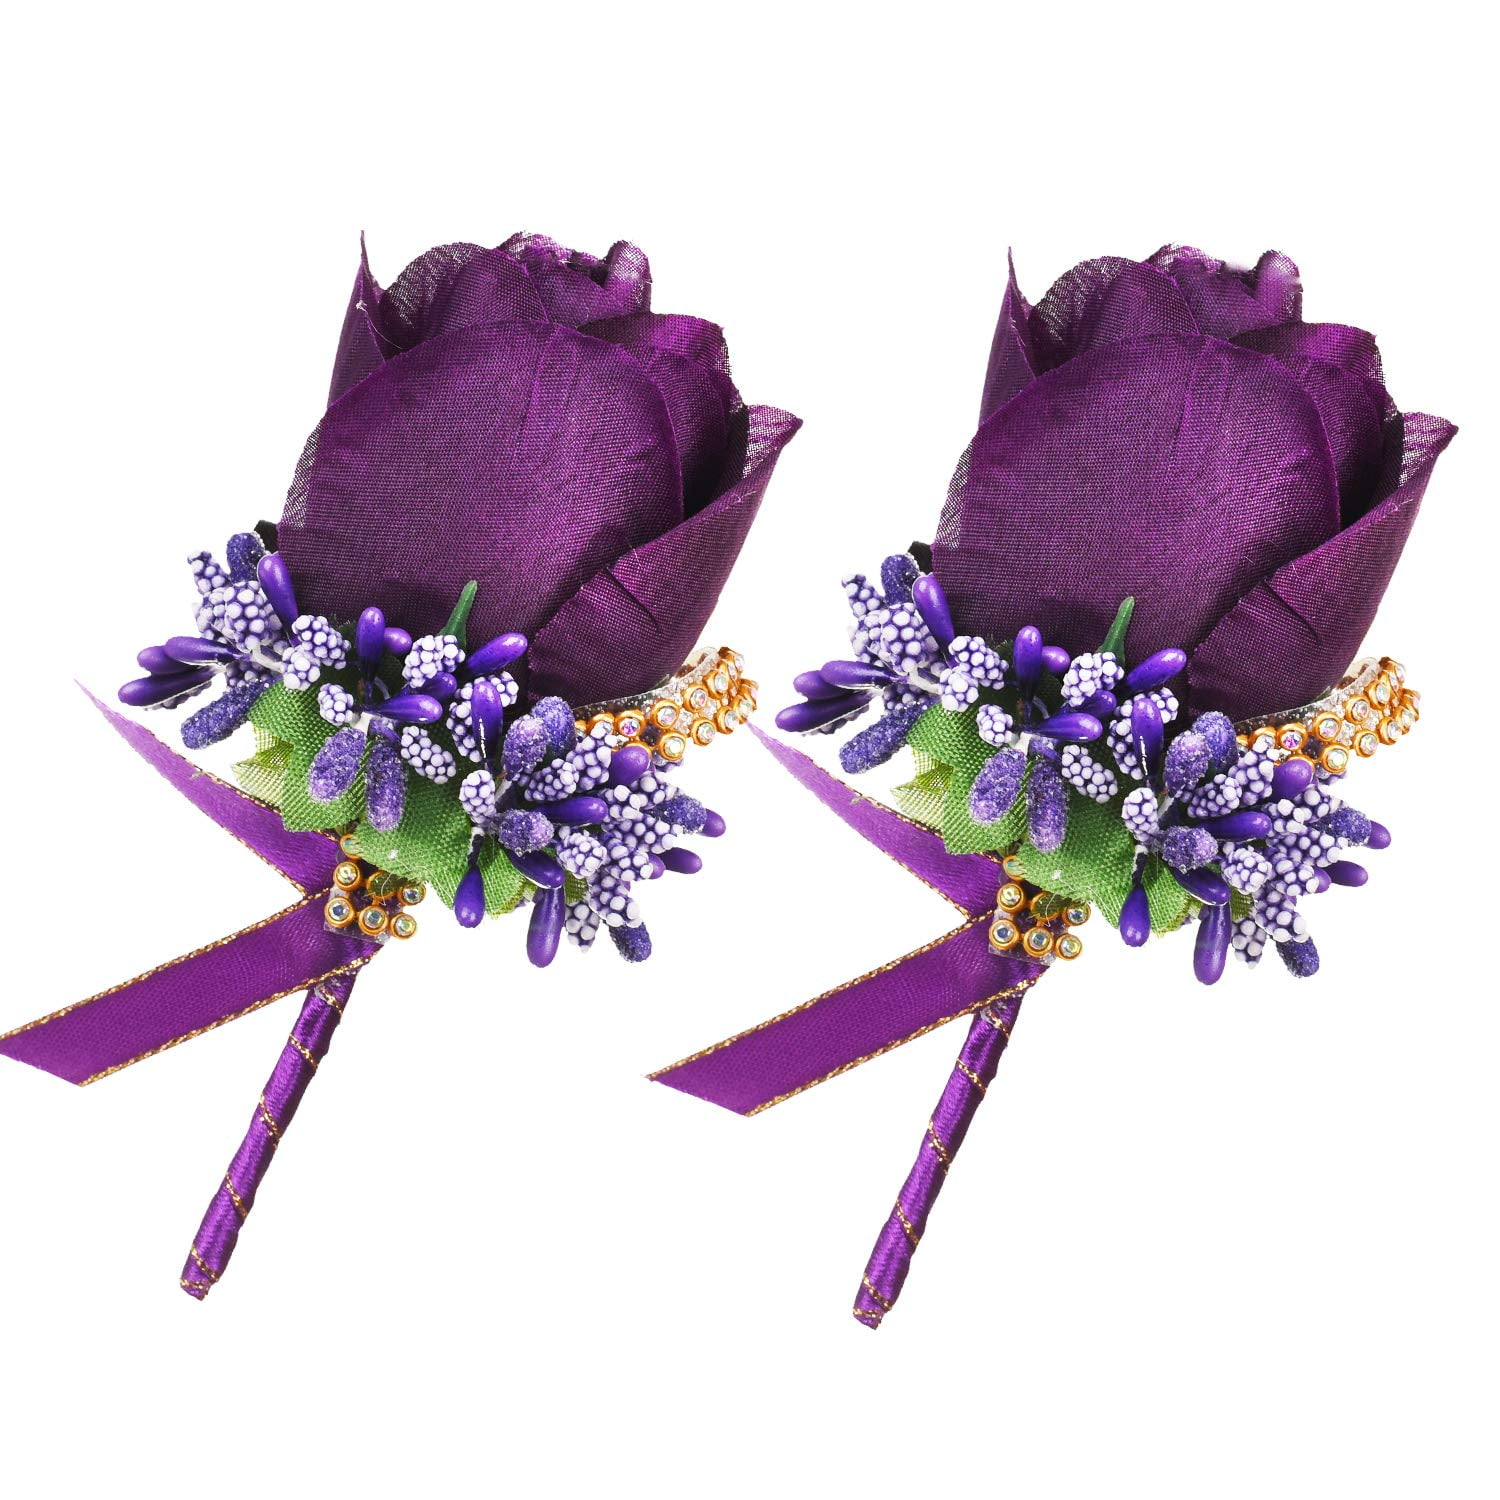 PURPLE ROSE CORSAGE WEDDING BUTTON HOLE VARIETY COLOURS GROOM BEST MAN GUEST 